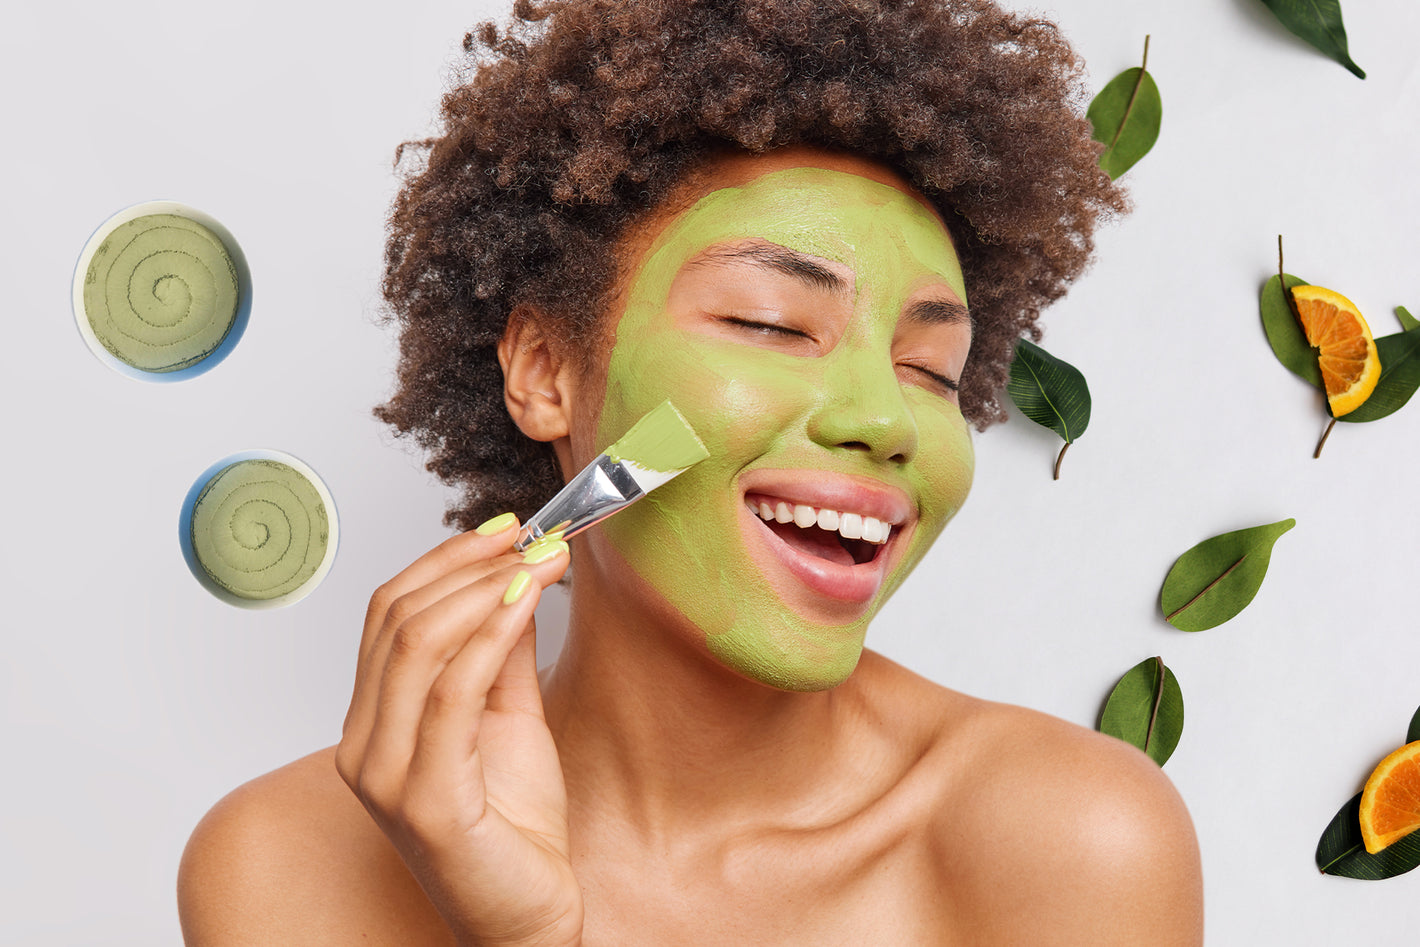 Green clay mask on a young lady's face